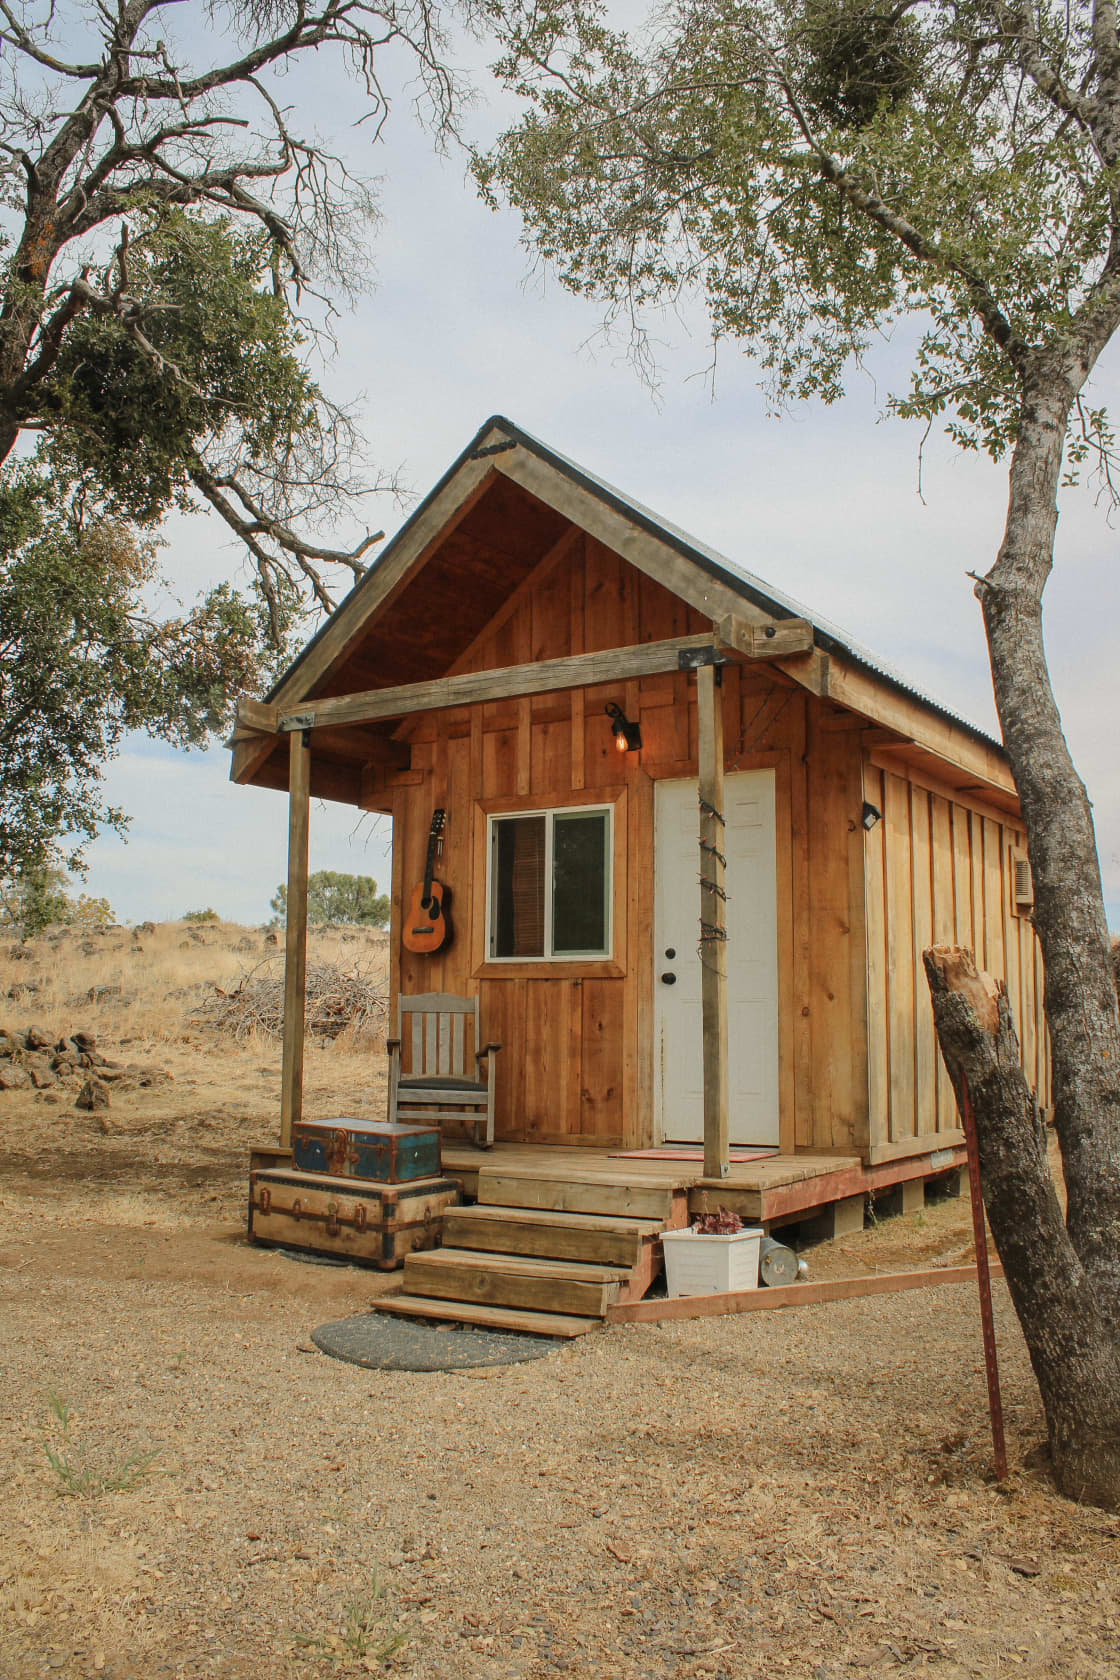 Cabins on the property offer a spacious one bedroom accomidation